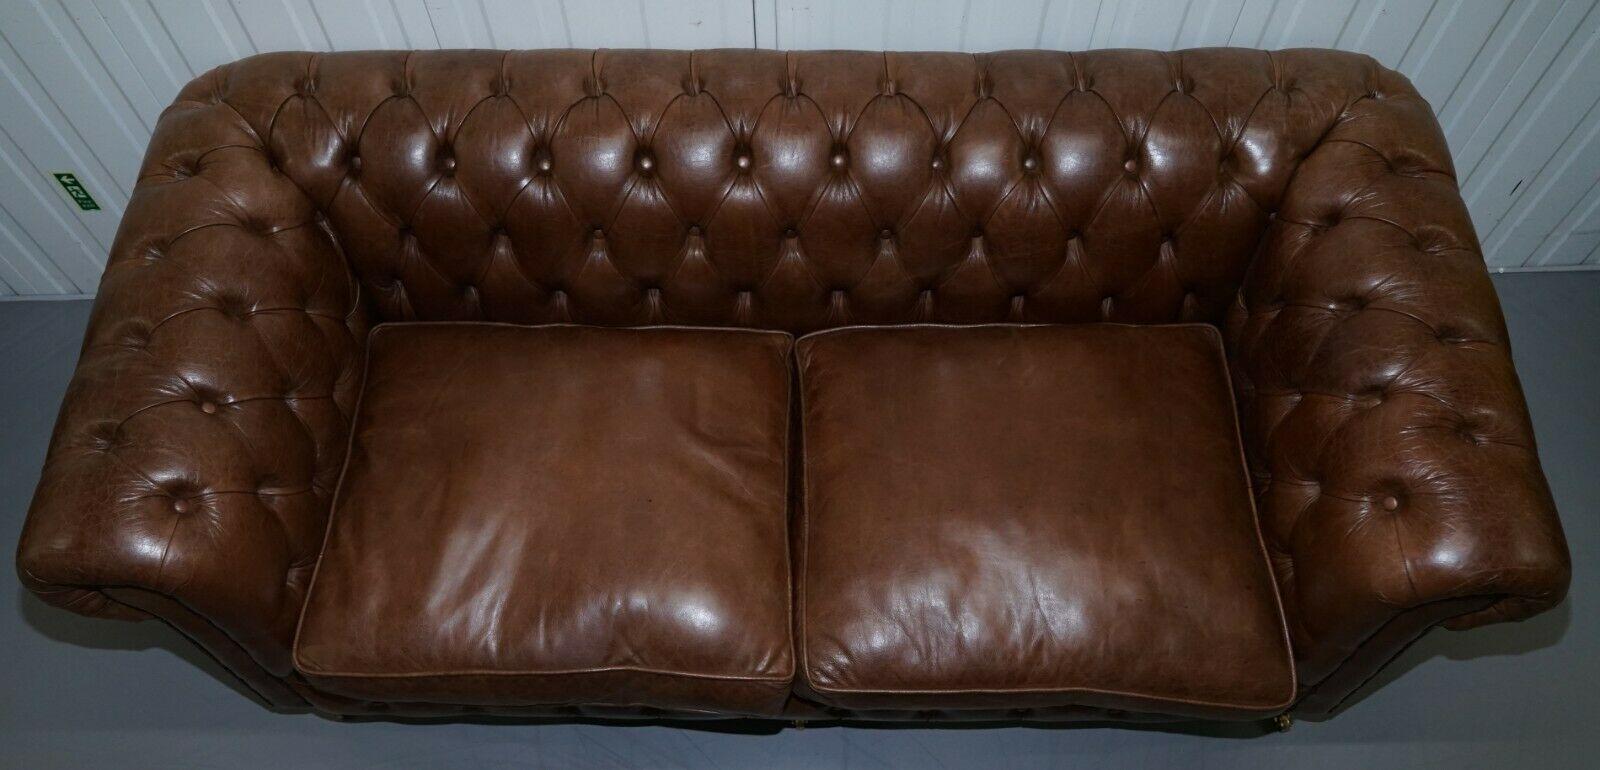 We are delighted to offer for sale this stunning Heritage brown leather Chesterfield 2-3 seater sofa

This sofa is part of a suite, this listing is for the 2-3 seater sofa only.

Each piece is very good looking and well made in lovely condition